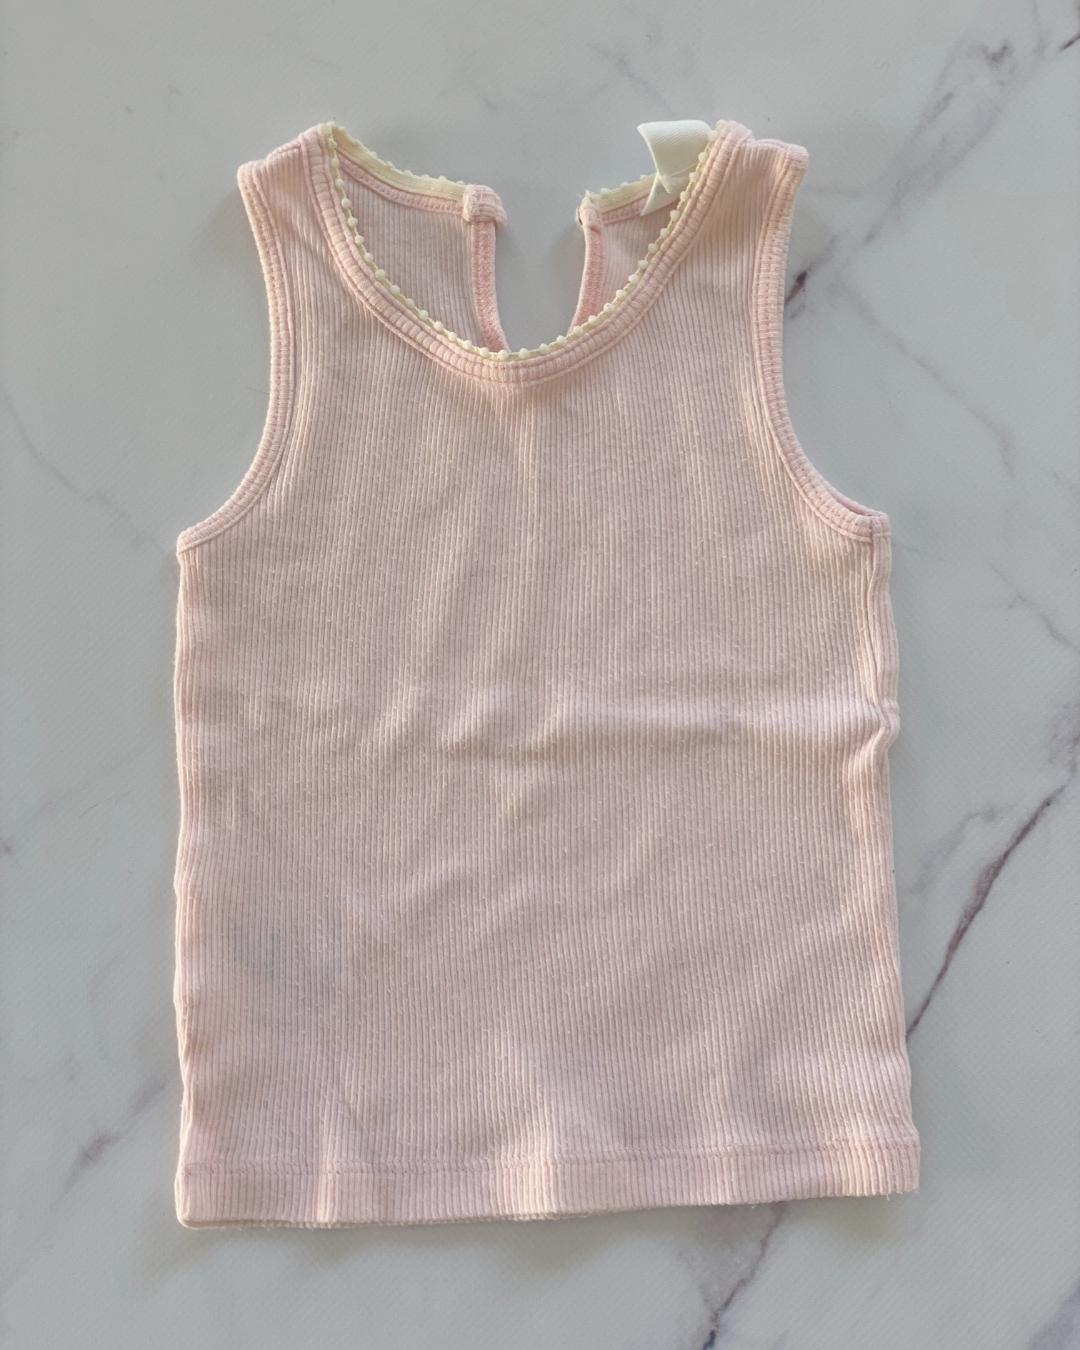 Country Road ribbed vest - 6/12m - Nearly New Kids